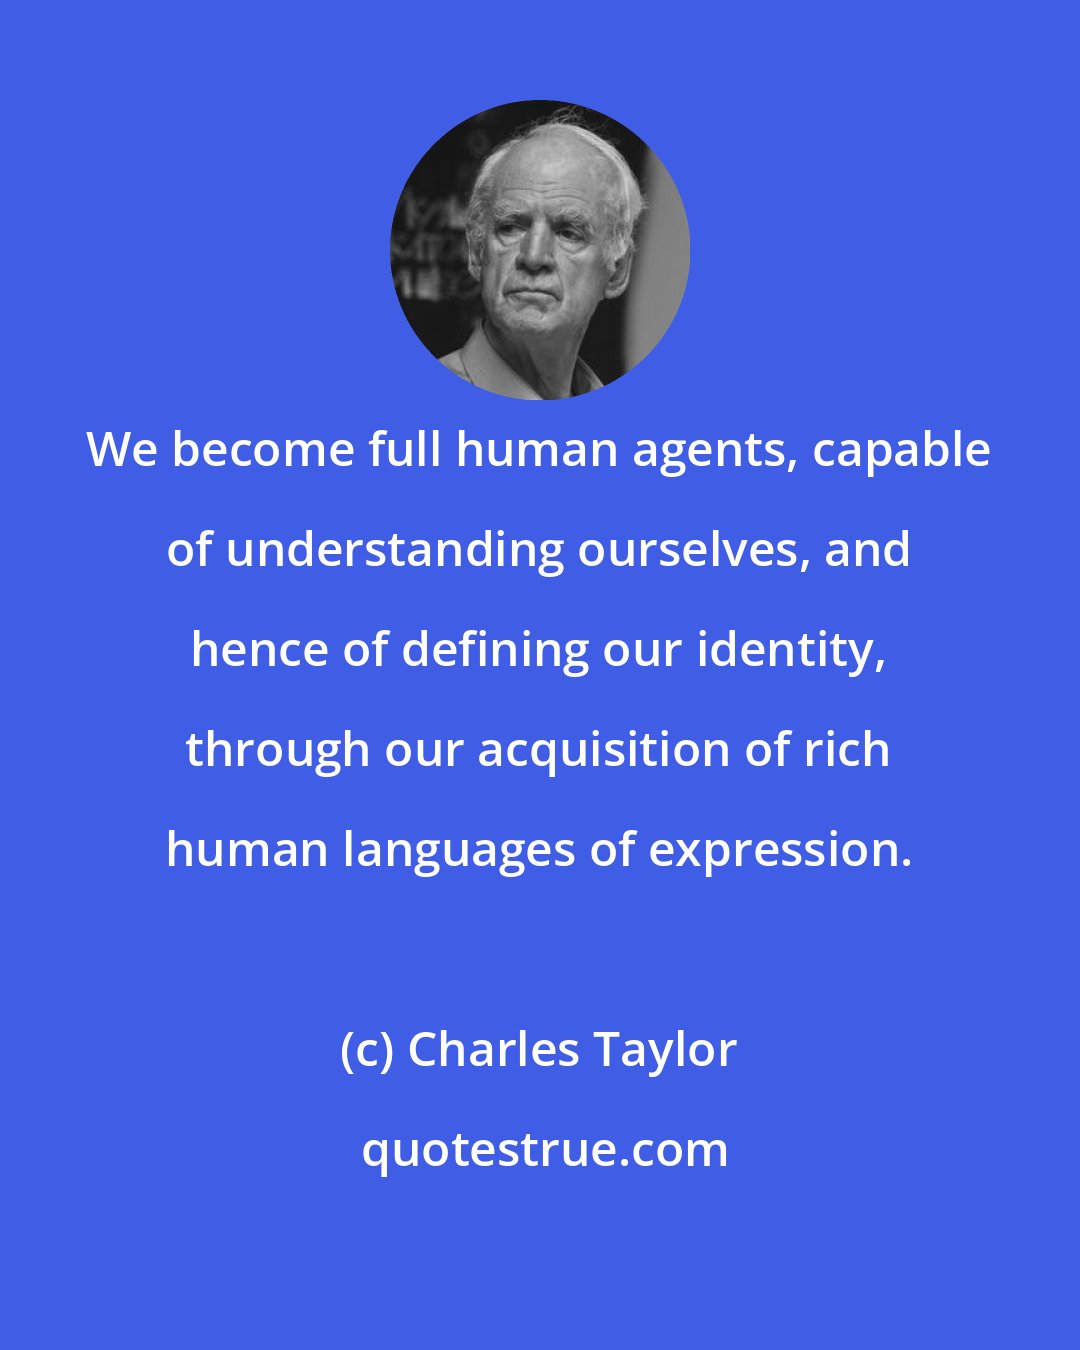 Charles Taylor: We become full human agents, capable of understanding ourselves, and hence of defining our identity, through our acquisition of rich human languages of expression.